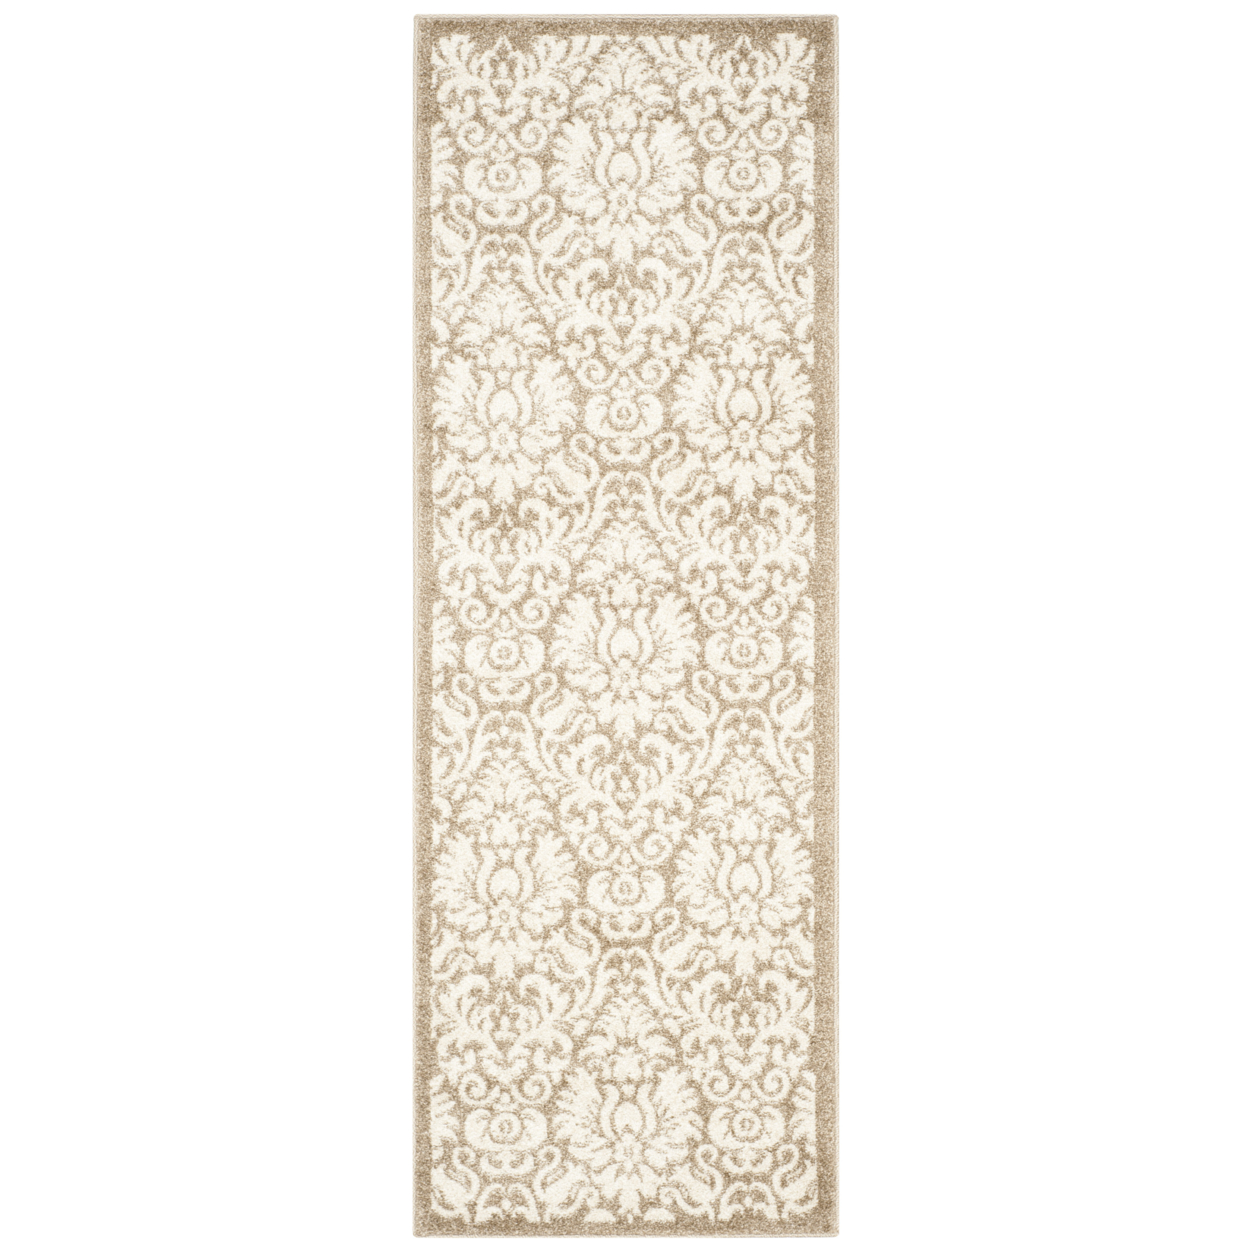 SAFAVIEH Amherst Collection AMT427S Wheat / Beige Rug - 7' Square